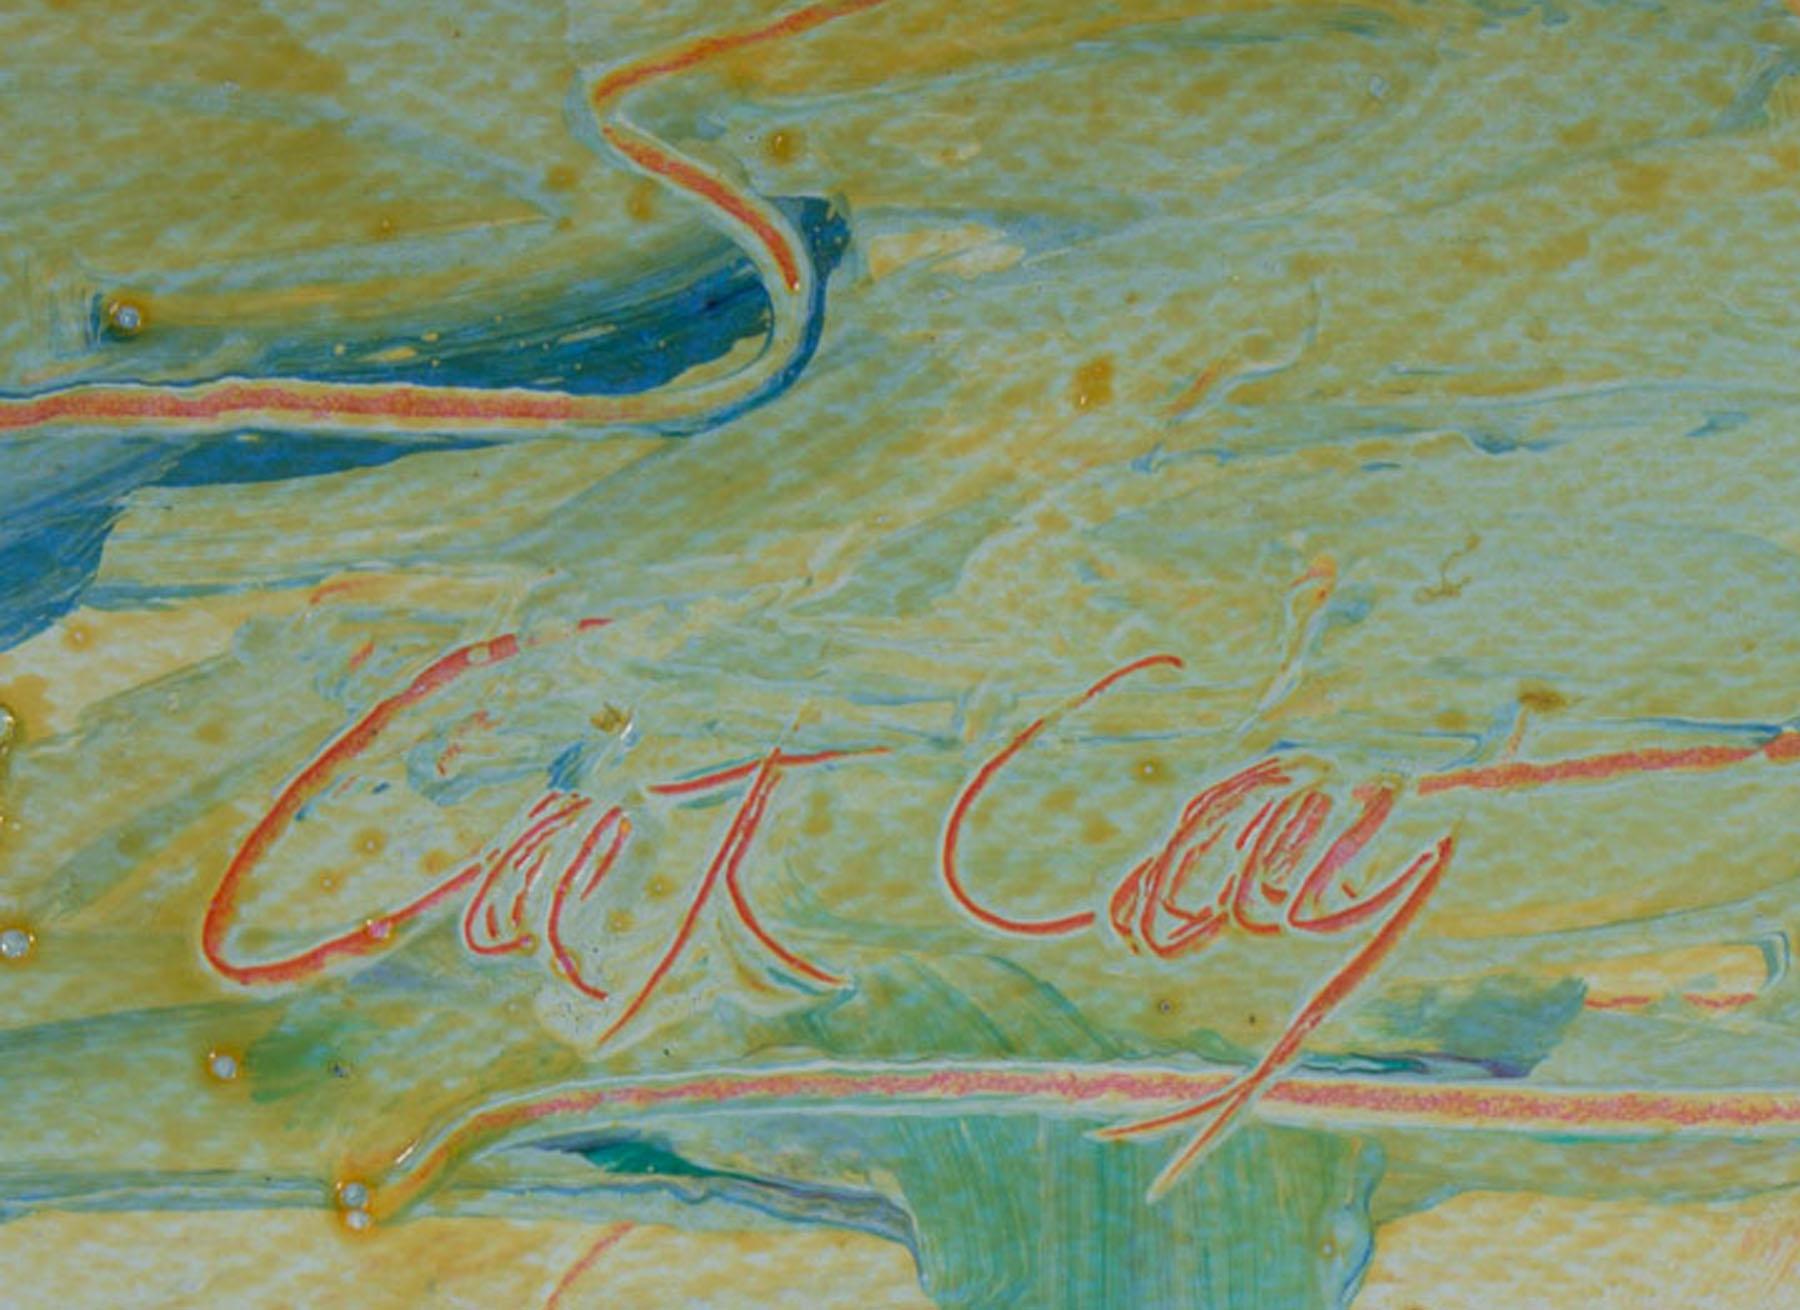 Modern Harry Hilson Signed 1980s “Cat Cay” Abstract Landscape Acrylic Painting For Sale